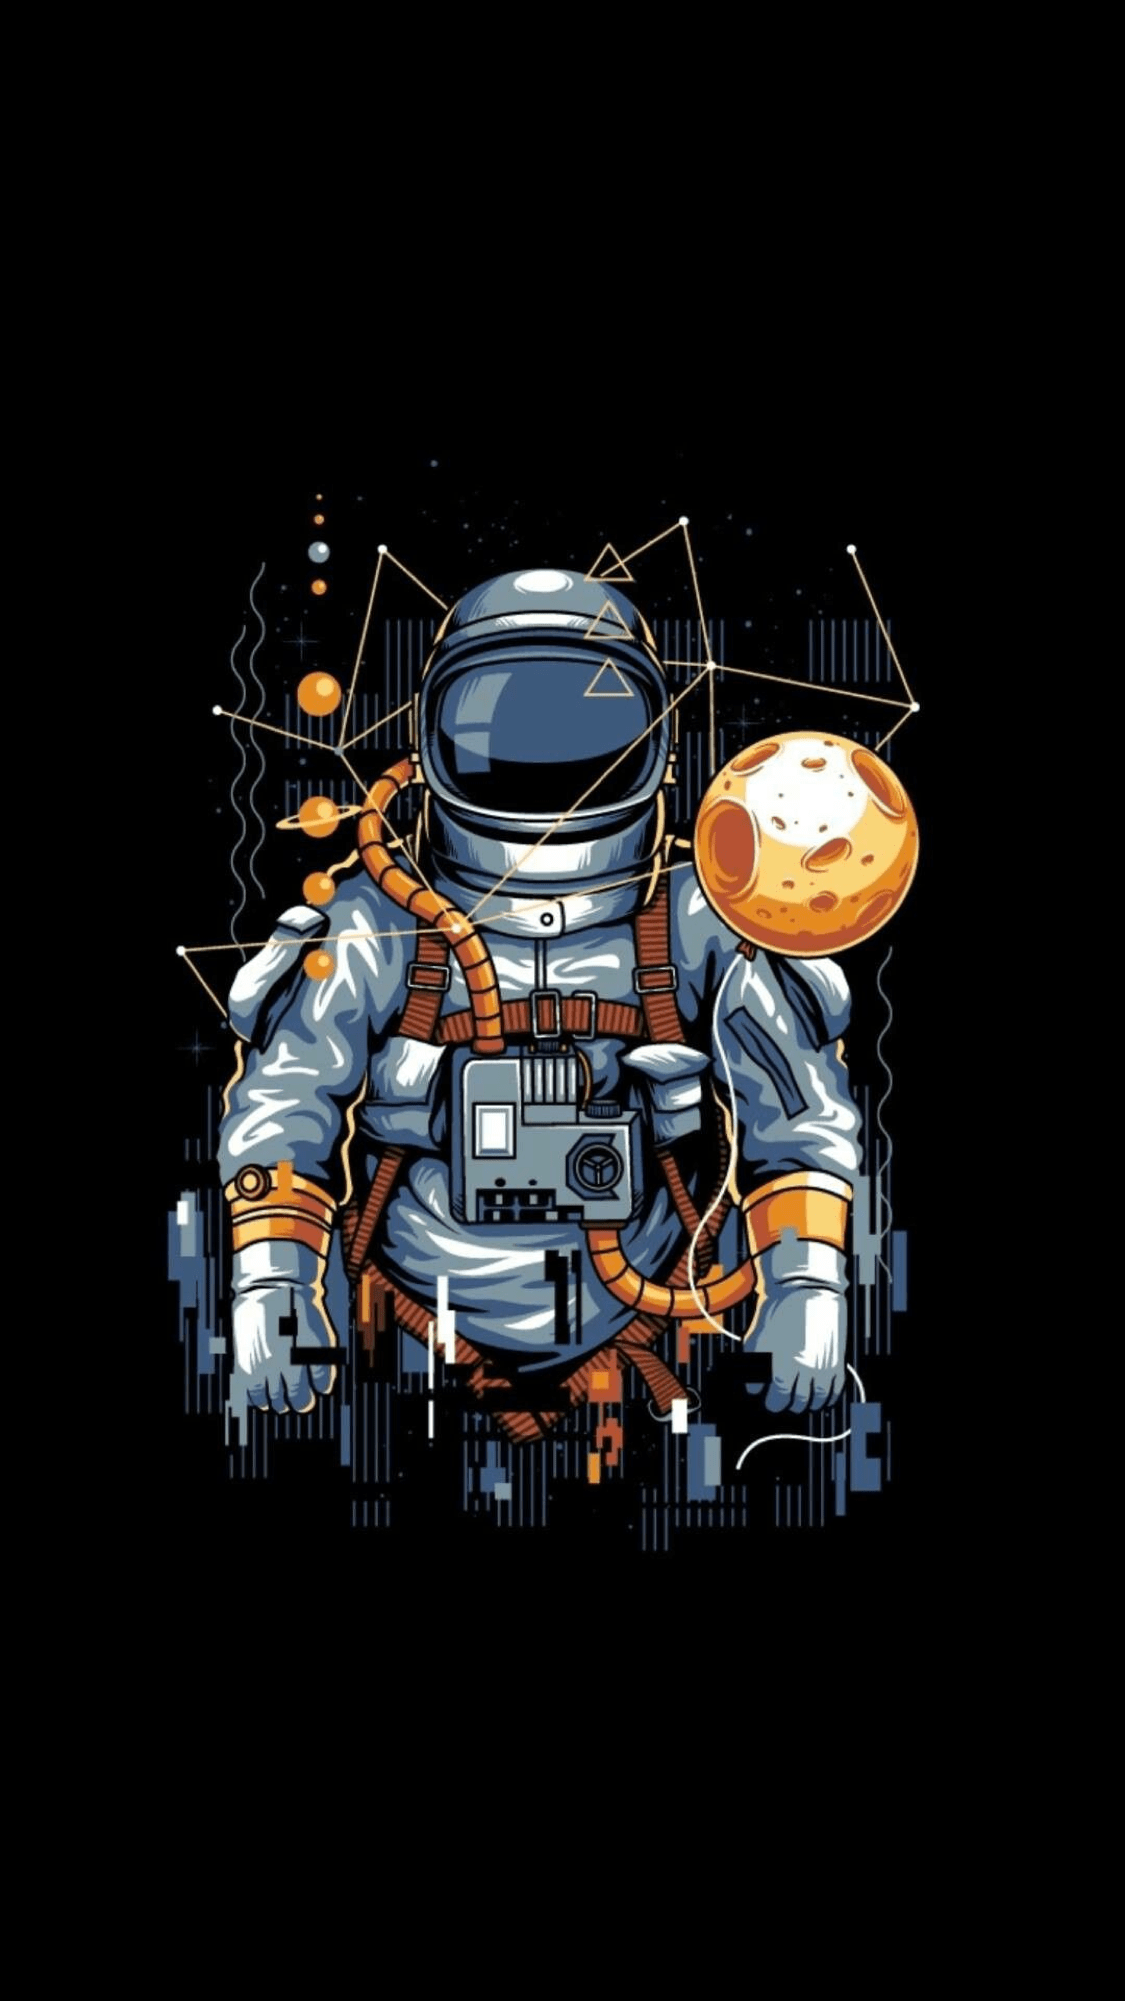 Astronaut Wallpaper.GiftWatches.CO